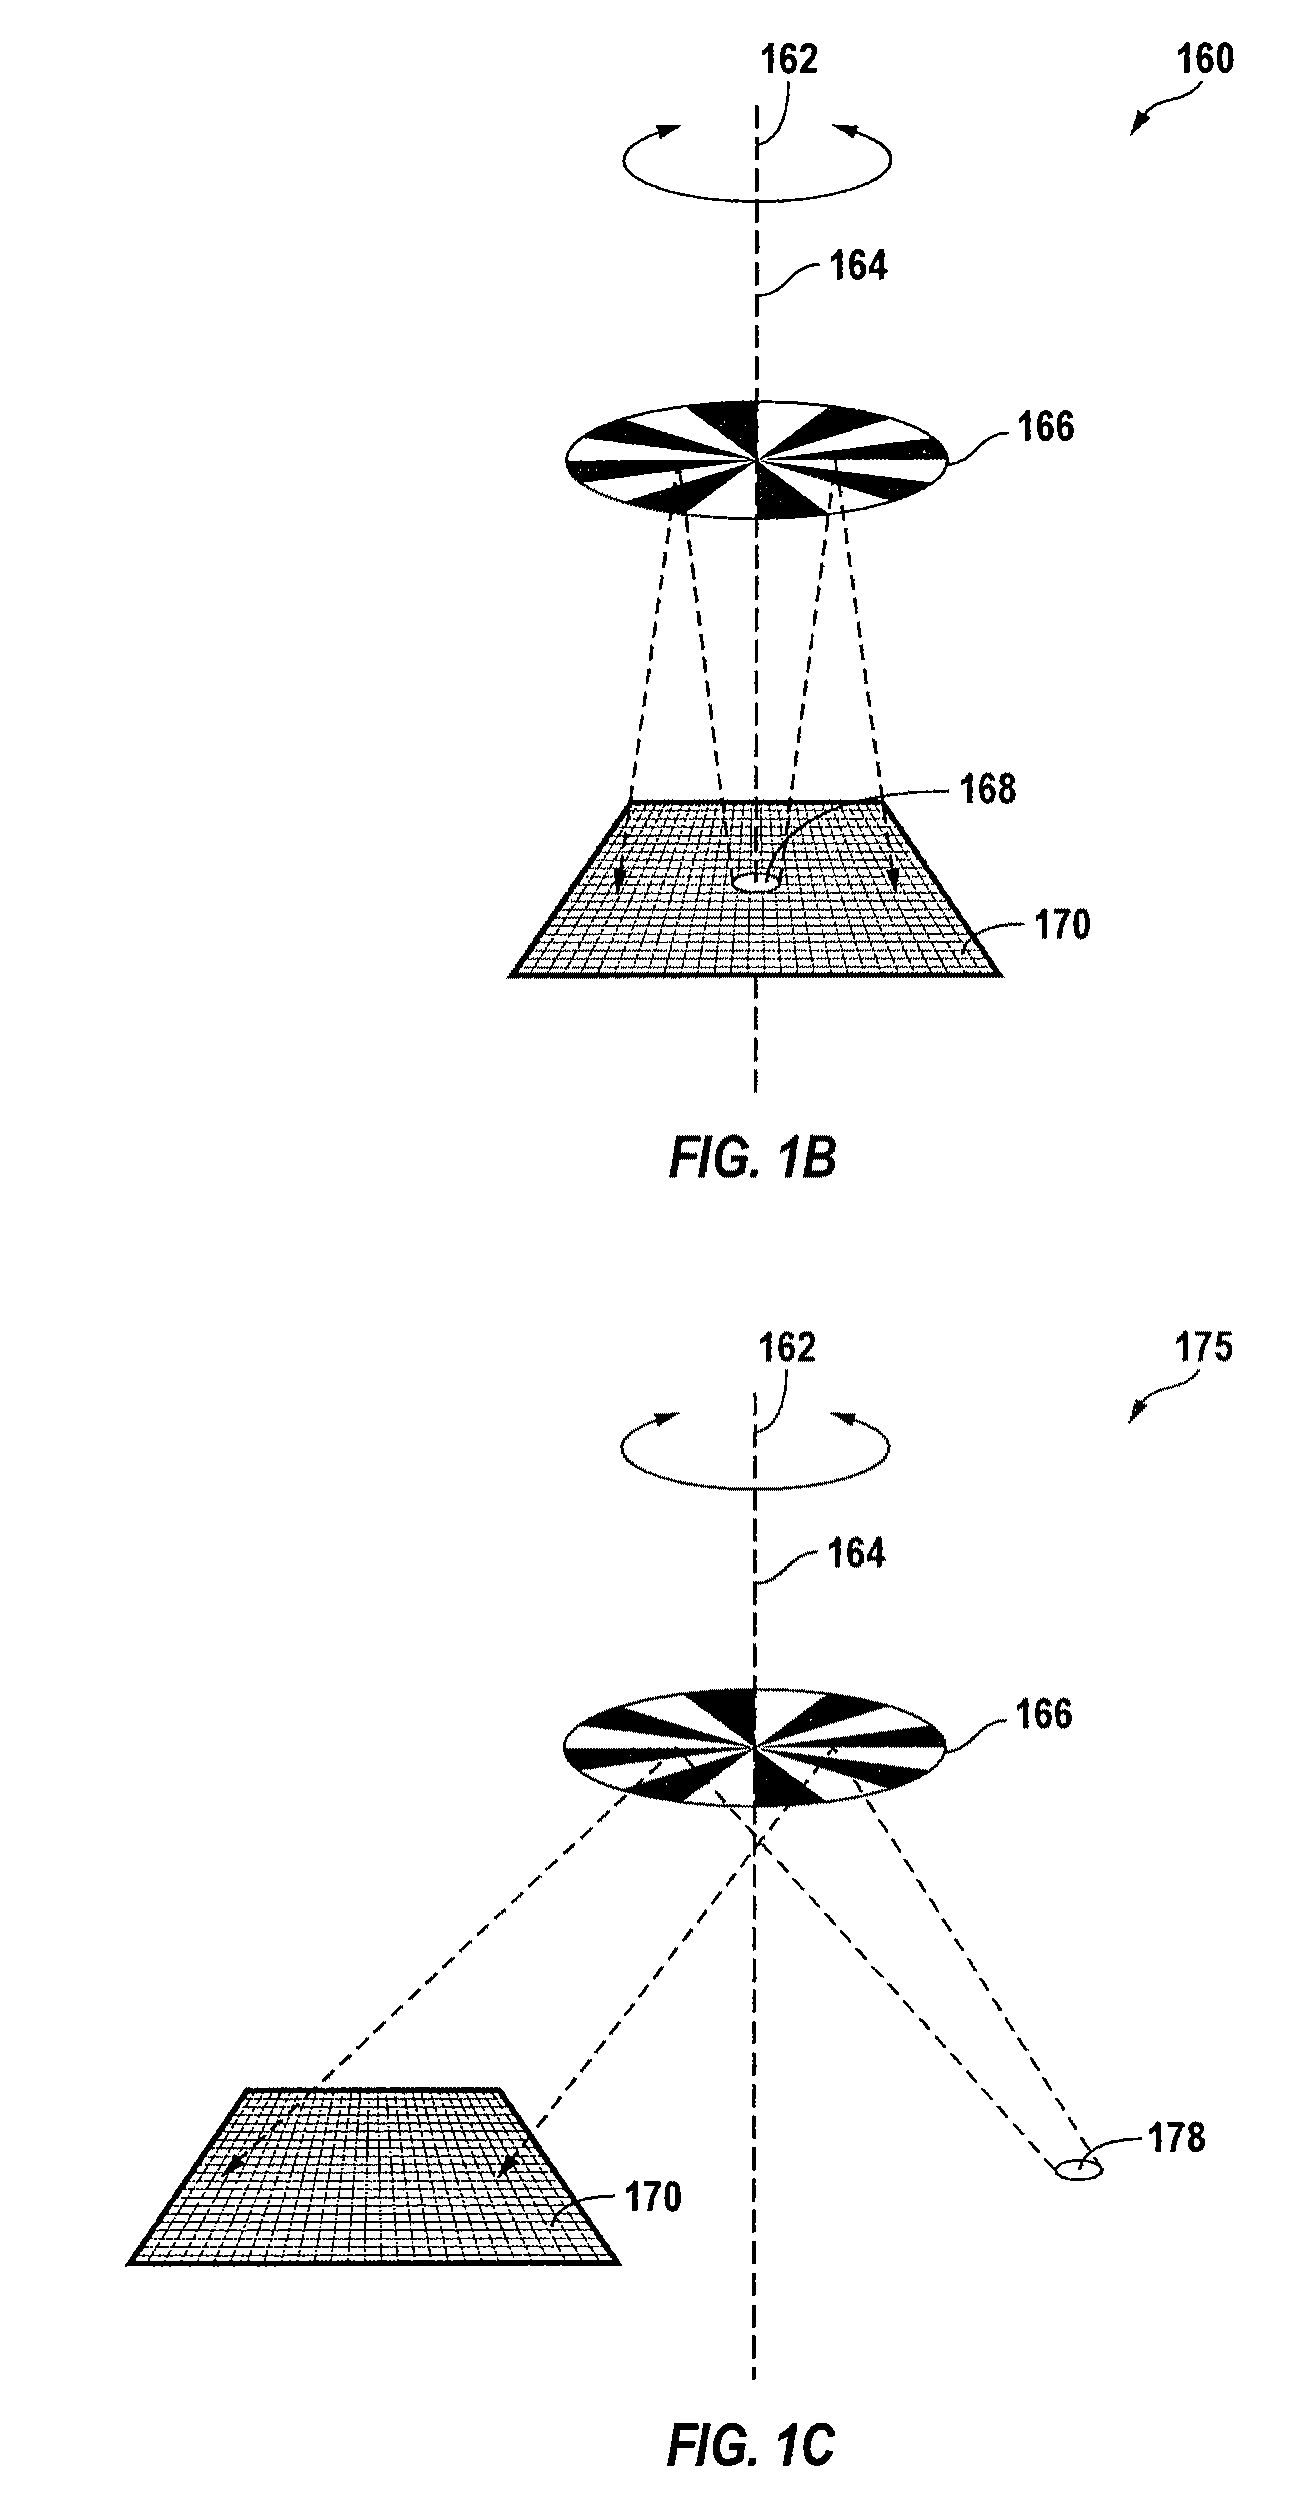 Method and system for angle measurement